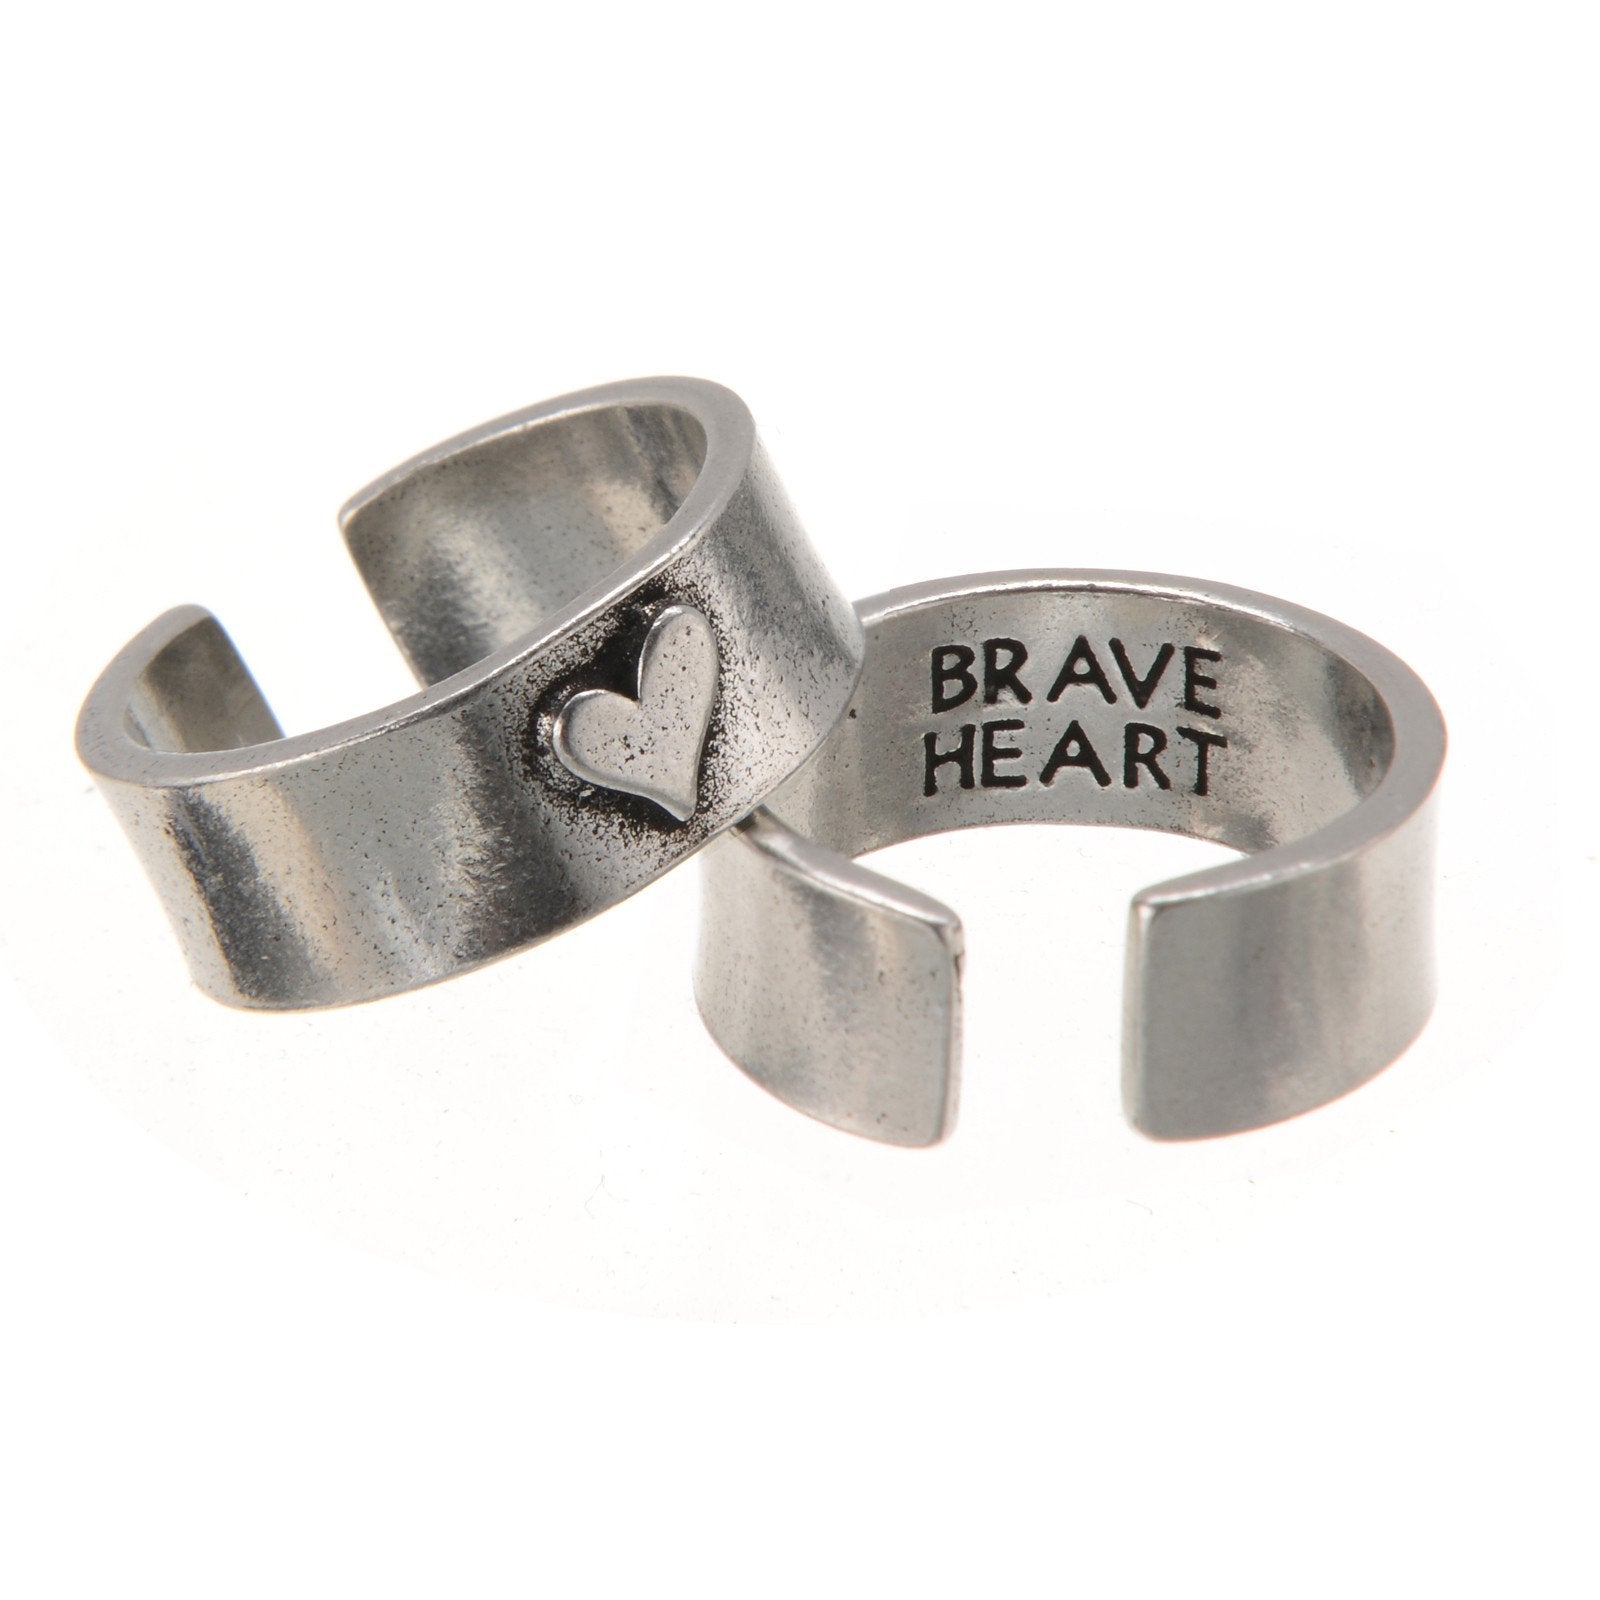 Hearts of Gold BRAVE HEART Ring